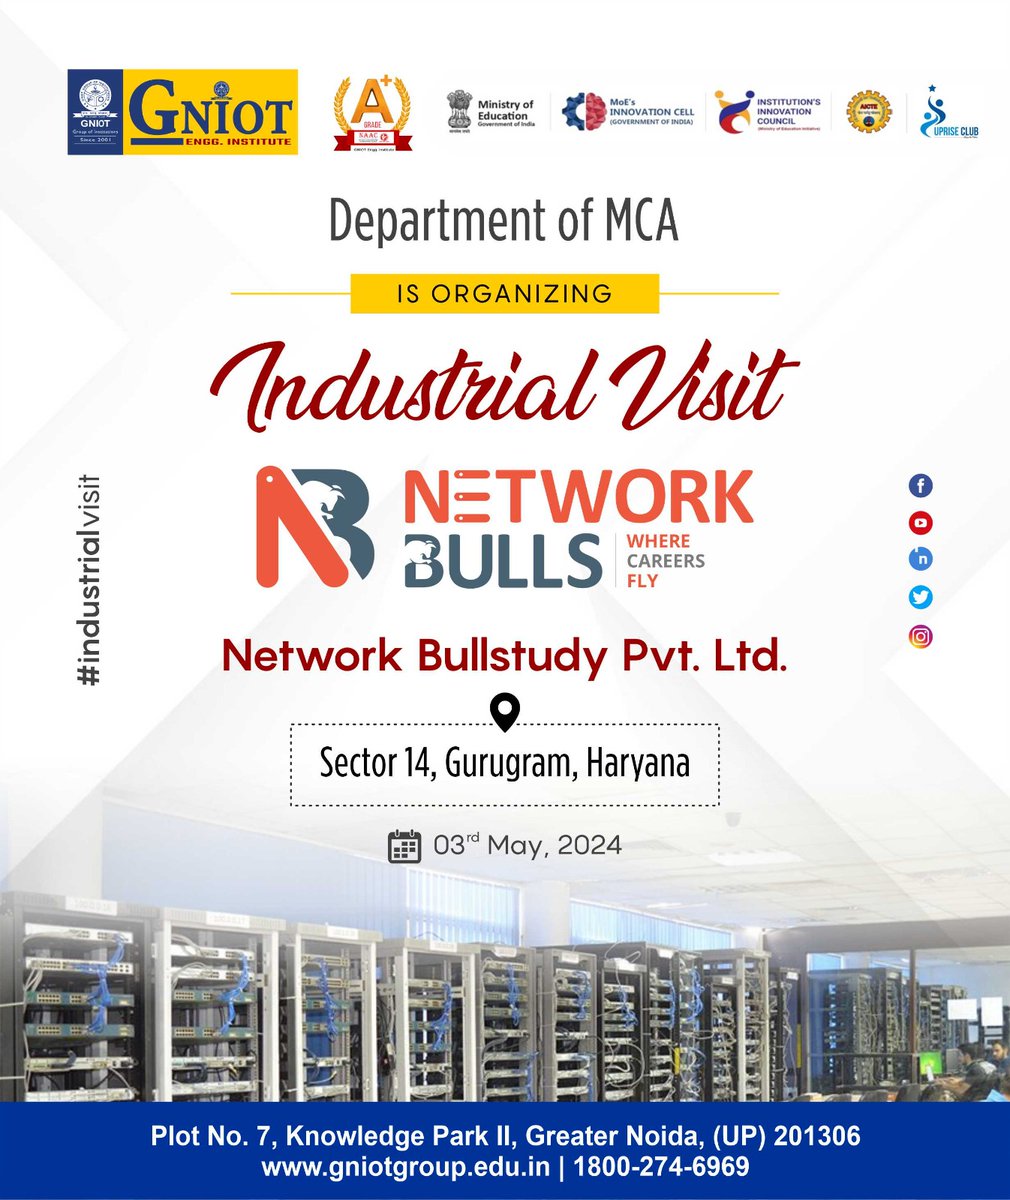 Join us for an Industrial Visit to Network Bullstudy Pvt Ltd., Gurgaon  on 3 May 2024, 09:15 A.M. Learn about cyber security, routing,  switching, and more! #IndustrialVisit #InteractiveLearning